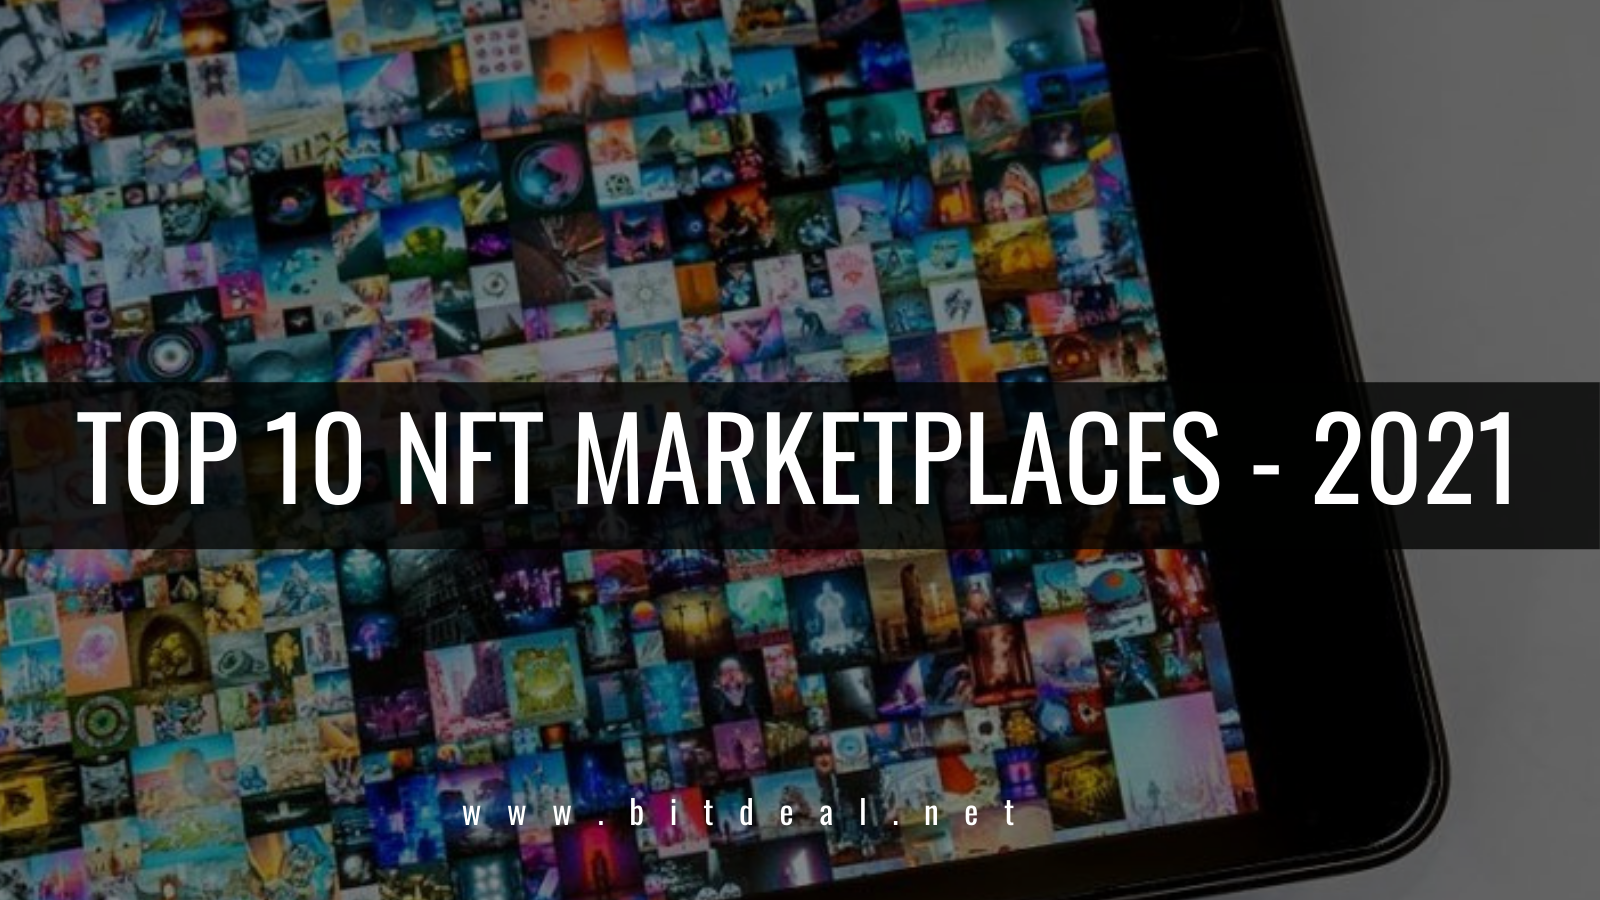 Top 10 NFT Marketplaces for 2021 & Beyond